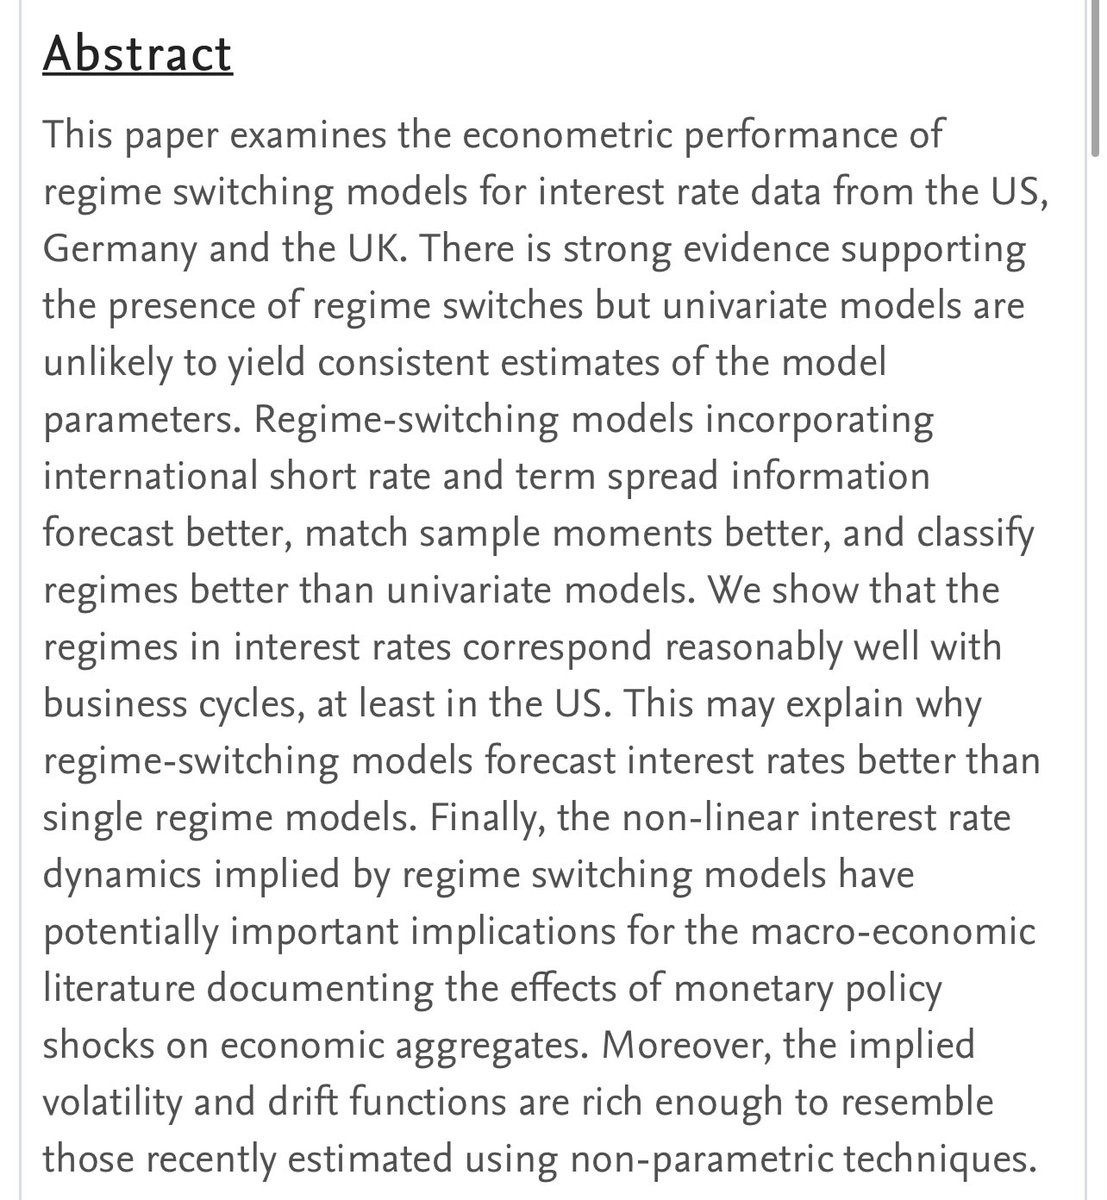 Regime Switches in Interest Rates (1998) https://papers.ssrn.com/sol3/papers.cfm?abstract_id=94012“We show that the regimes in interest rates correspond reasonably well with business cycles, at least in the US.”